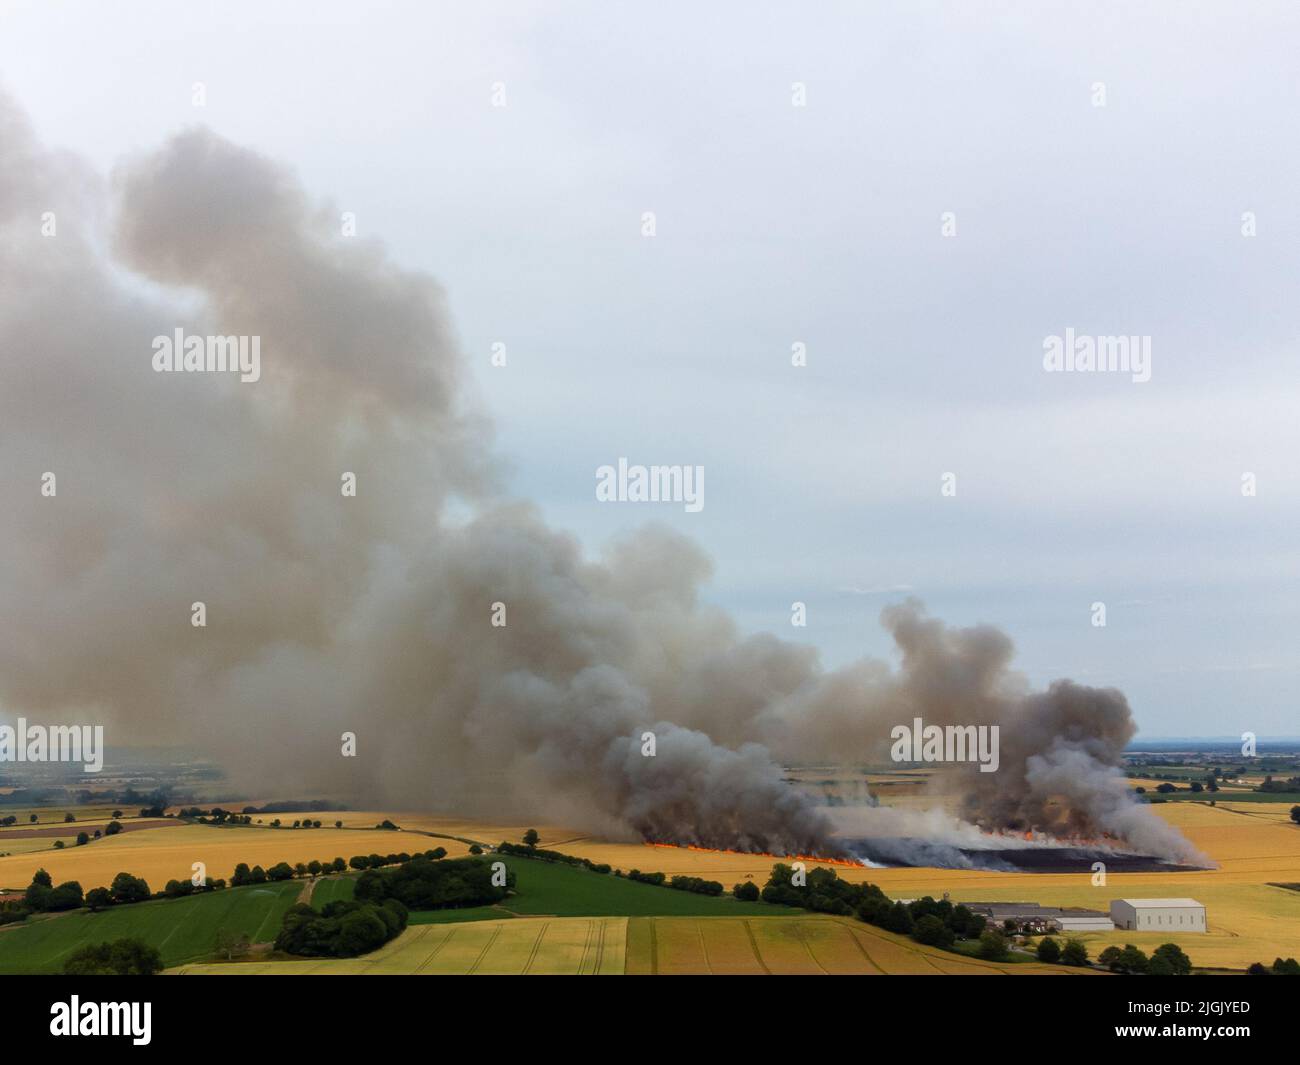 Ripon, North Yorkshire, UK. 11th July, 2022. Smoke and flames fill the air in this field fire during the hot summer. The fire on farmland near Ripon was caused by a combine harvester catching fire and spreading to the crop which was being harvested. Stock Photo